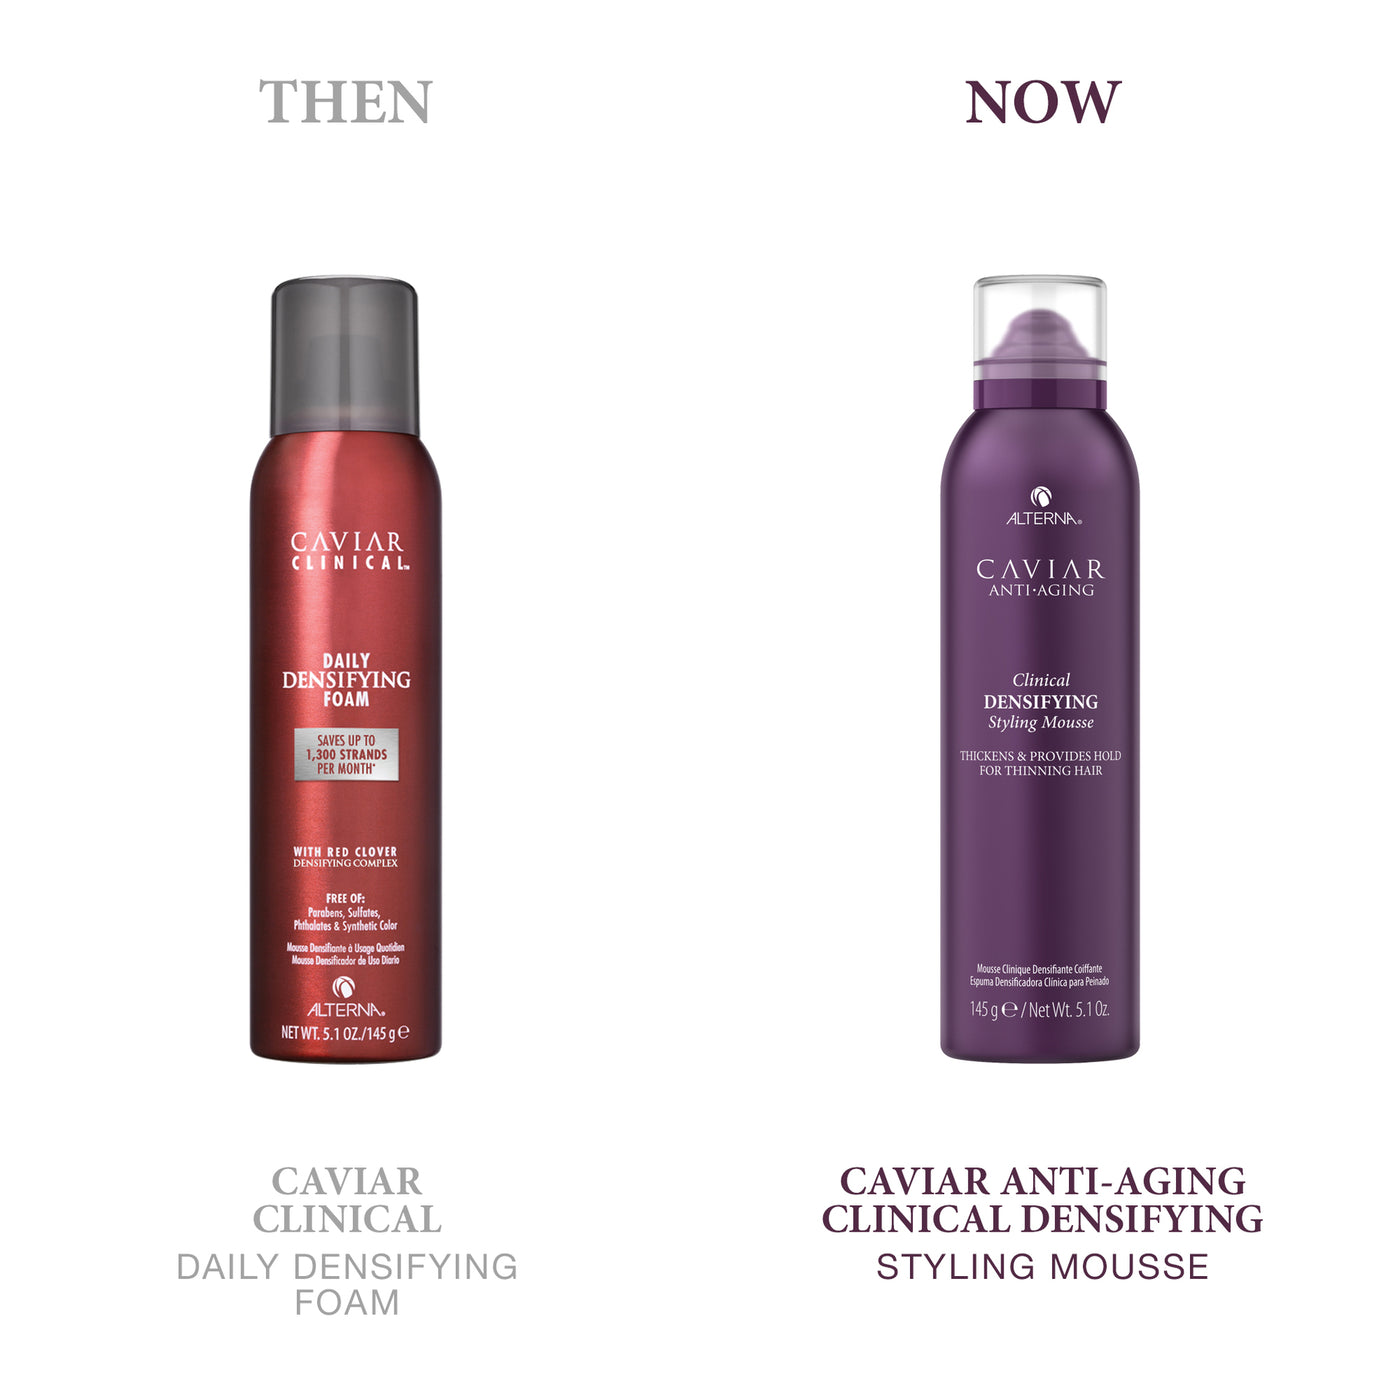 Alterna Caviar Anti-Aging Clinical Densifying Style Mousse (145g) new packaging and updated formula